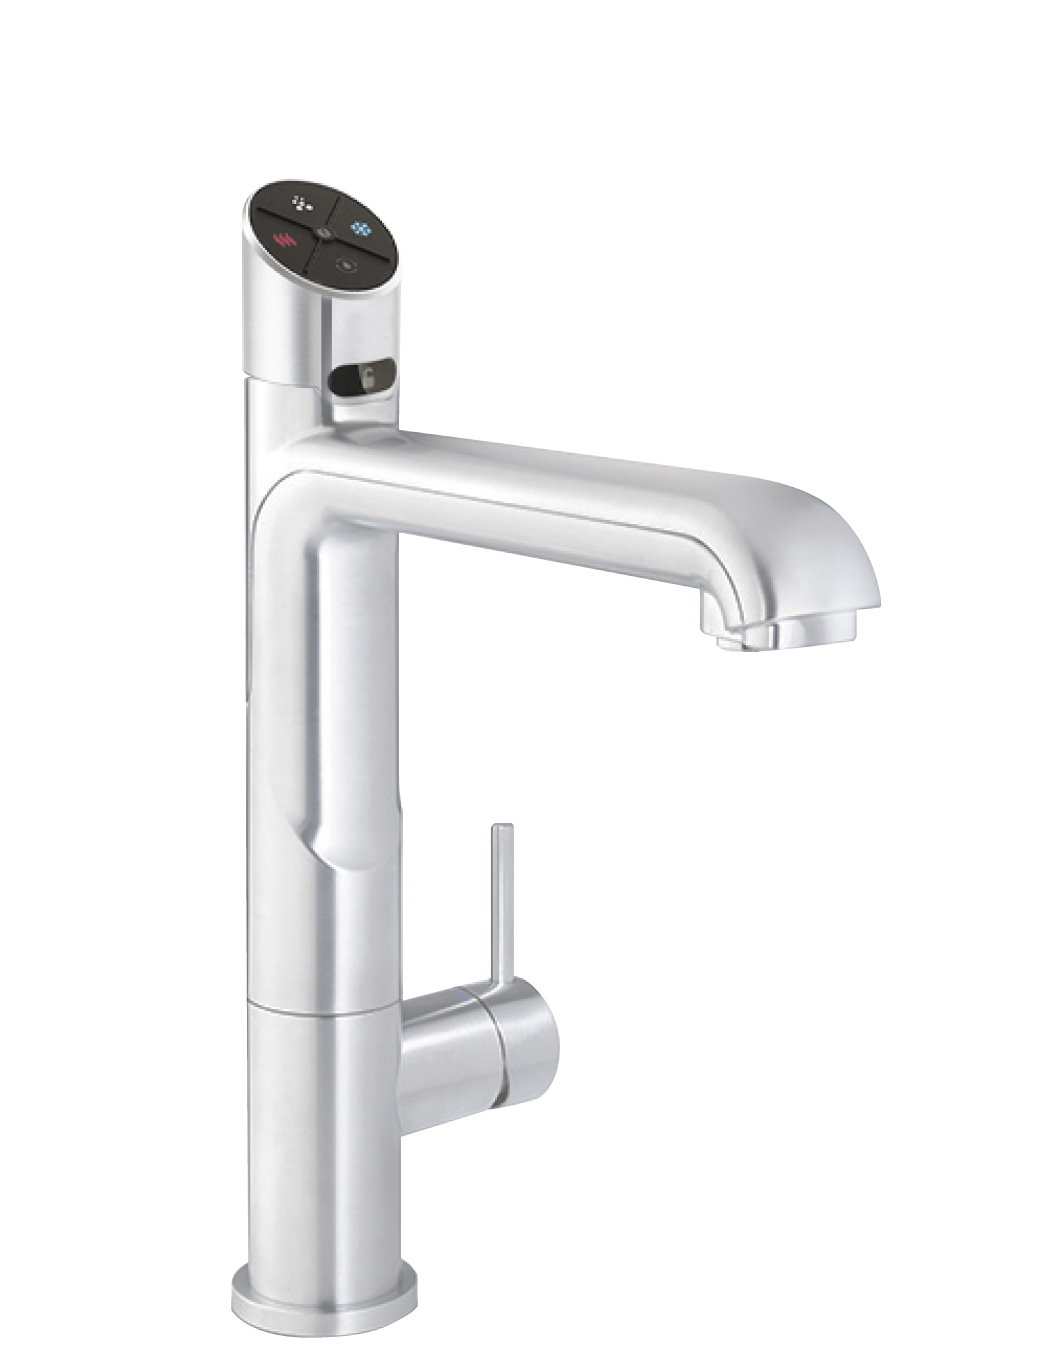 hydro tap all in one for installation over a sink